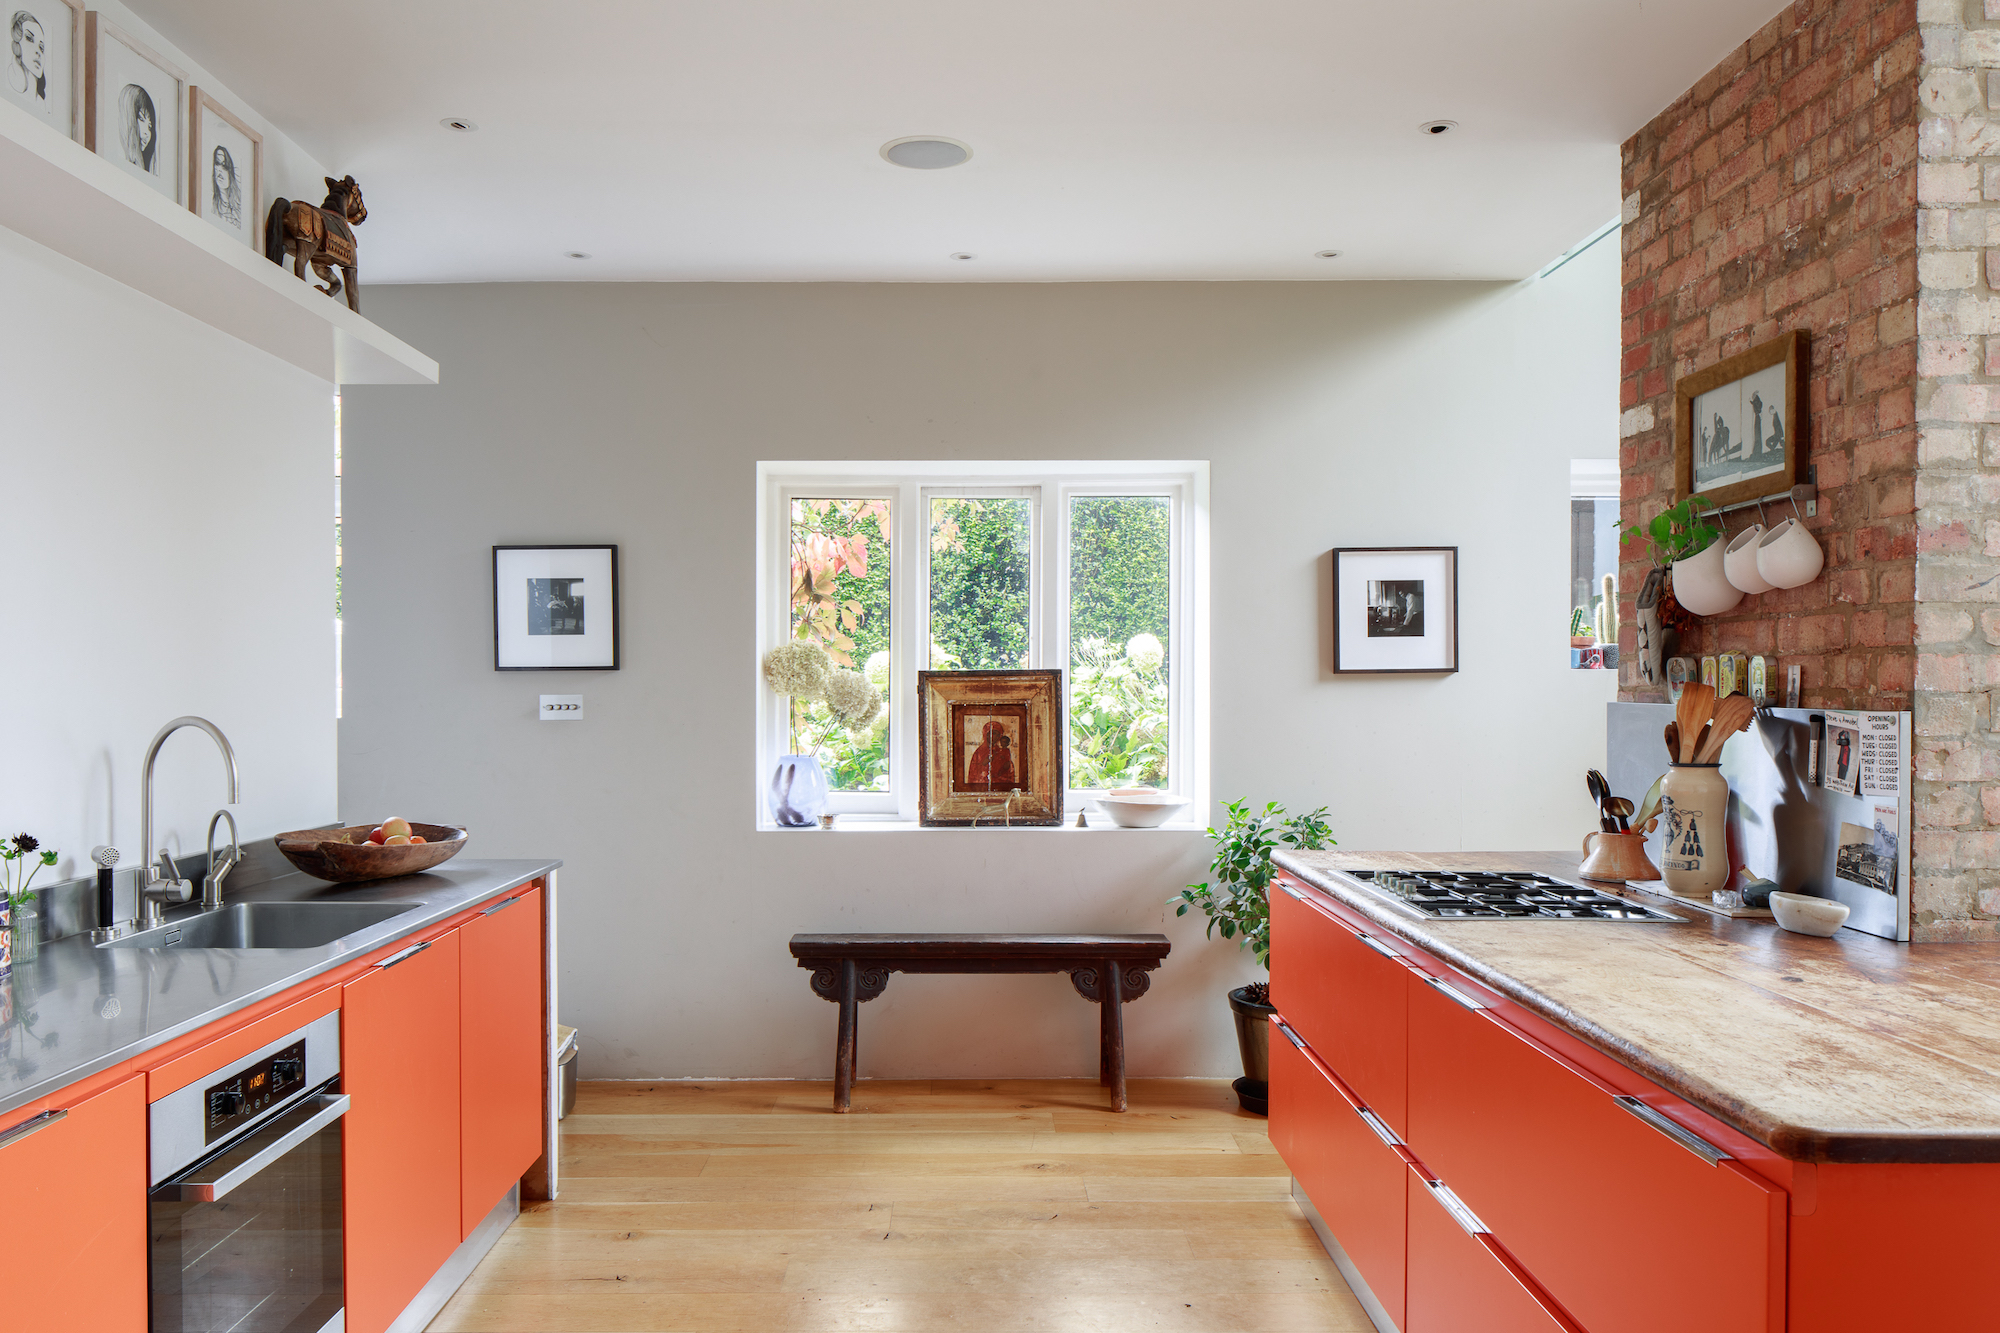 A kitchen with orange cabinetry